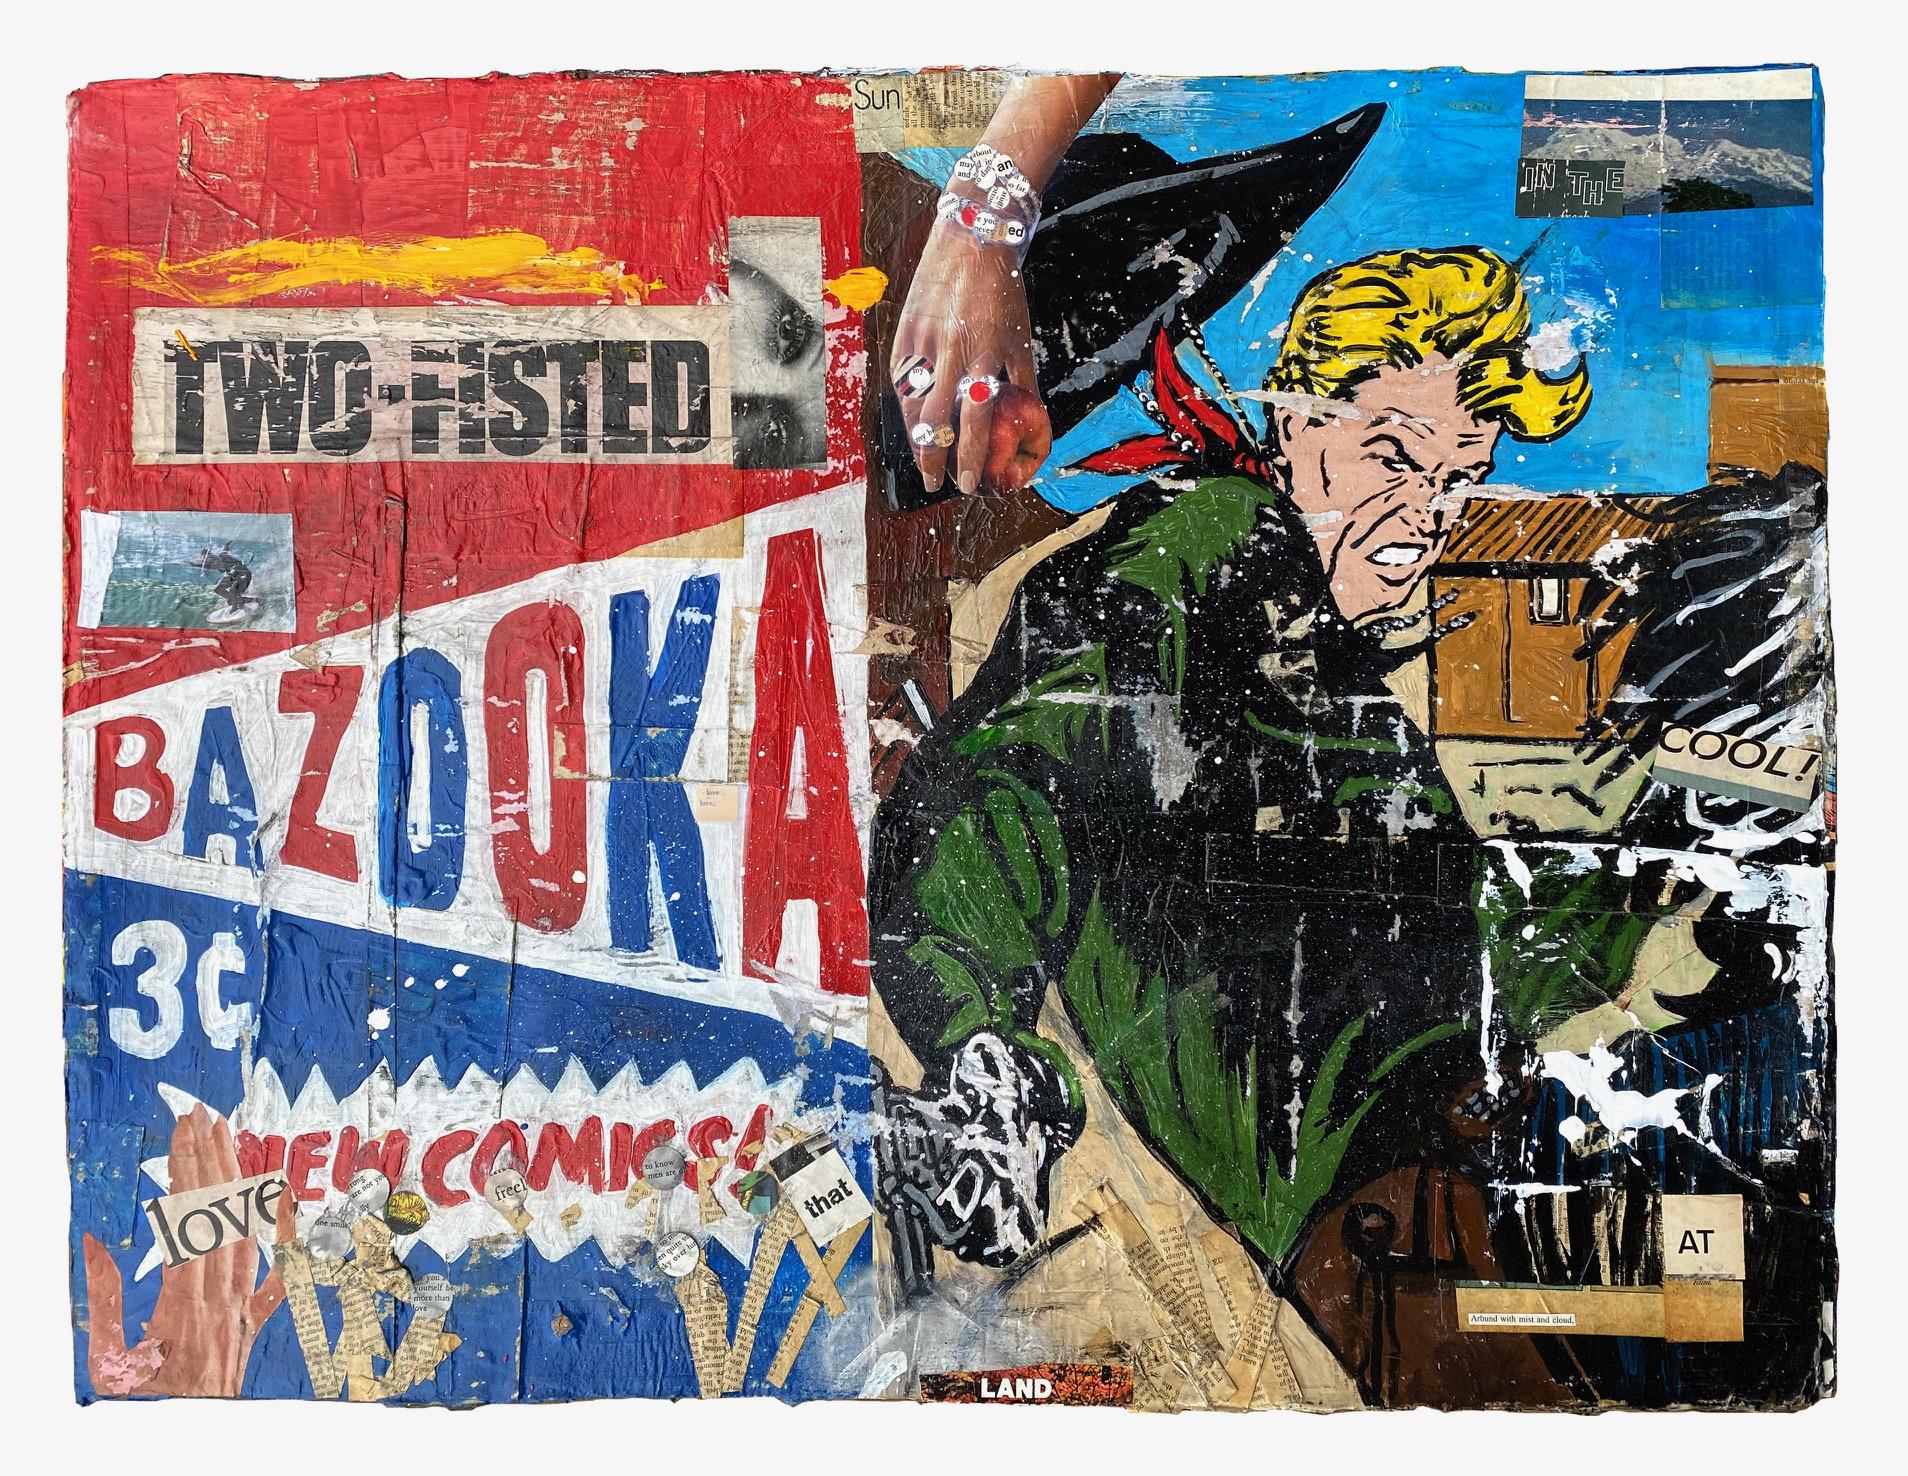 GREG MILLER
"Bazooka"
Acrylic & Collage on Paper
23 x 30 in. Unframed

Drawing from the diverse cultural and geographic makeup of his Californian roots, Greg Miller explores his relationship with the space he inhabits to communicate a particular